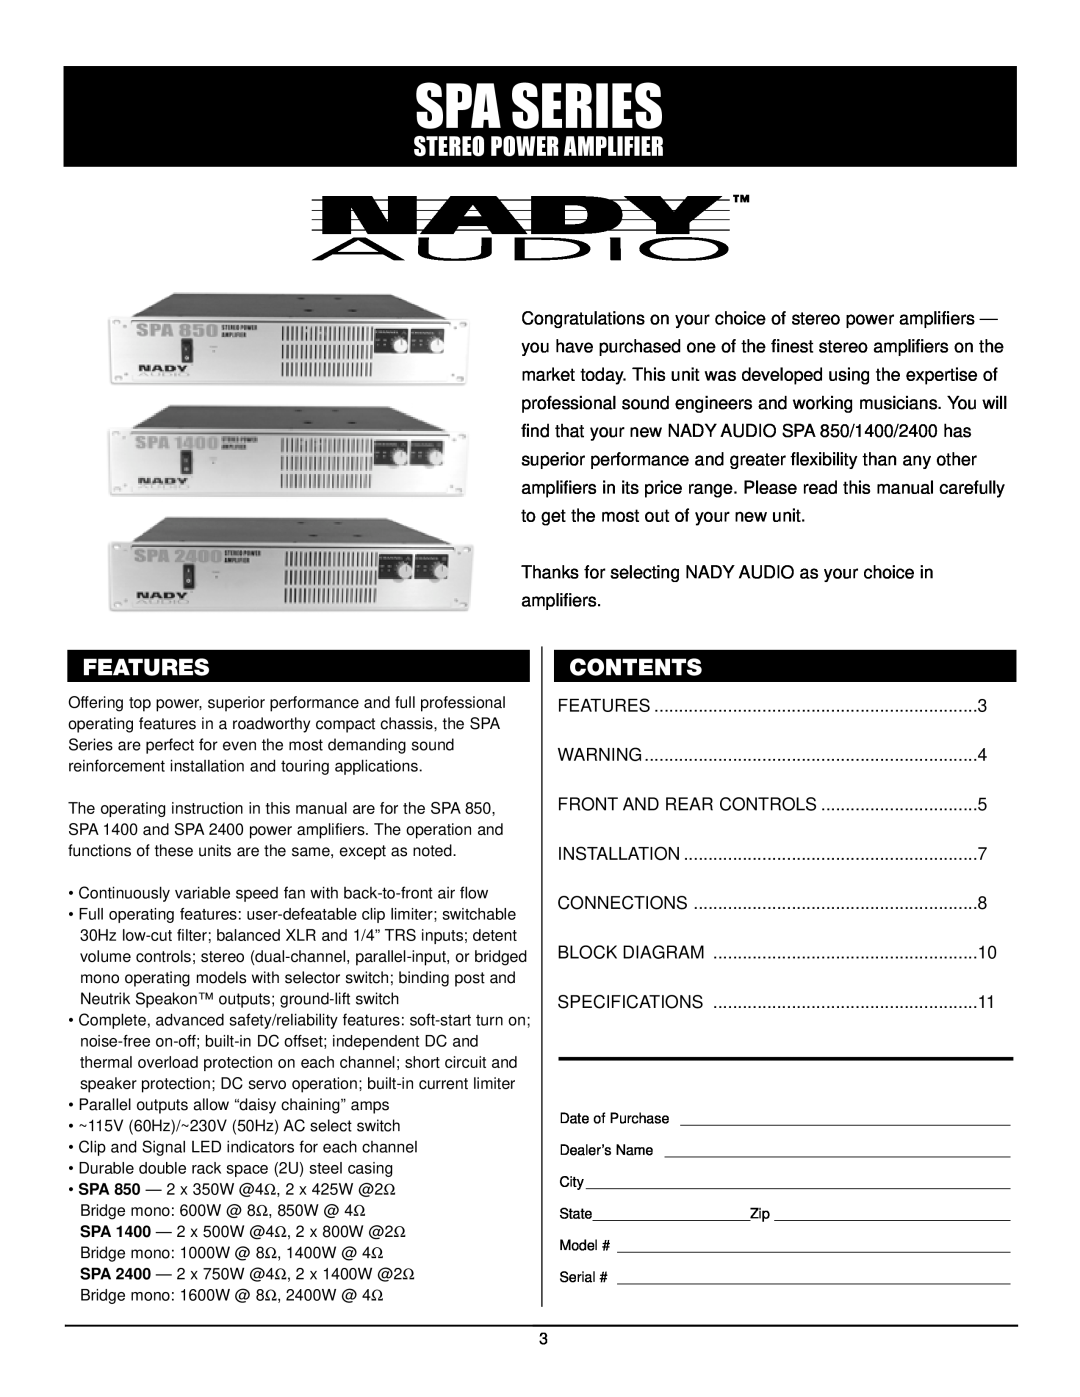 Nady Systems SPA 1400 owner manual Features, Contents, Spa Series, Stereo Power Amplifier 